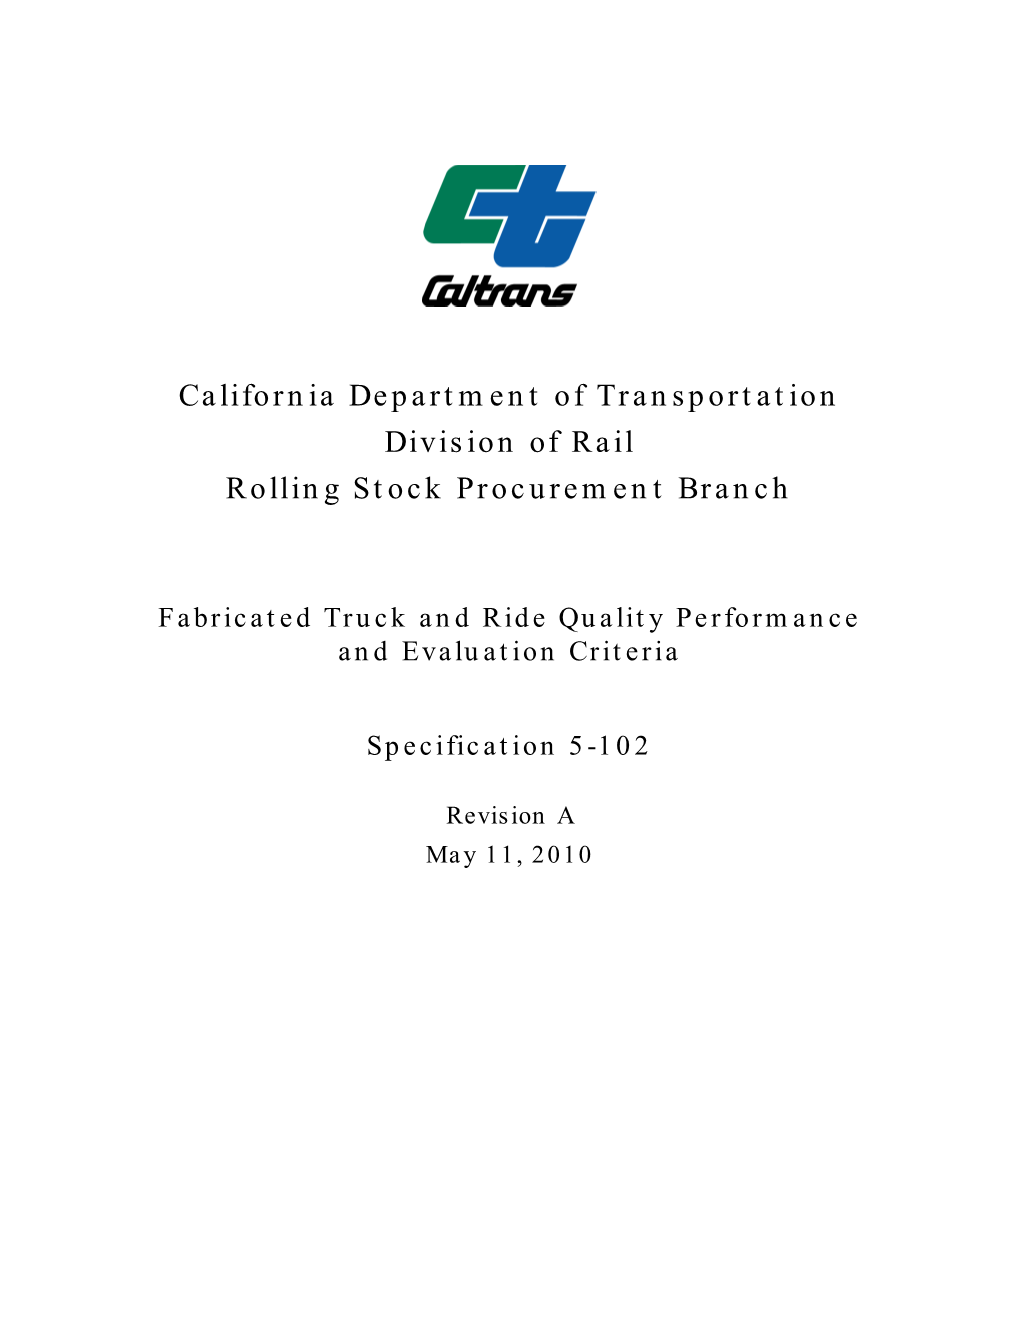 California Department of Transportation Division of Rail Rolling Stock Procurement Branch